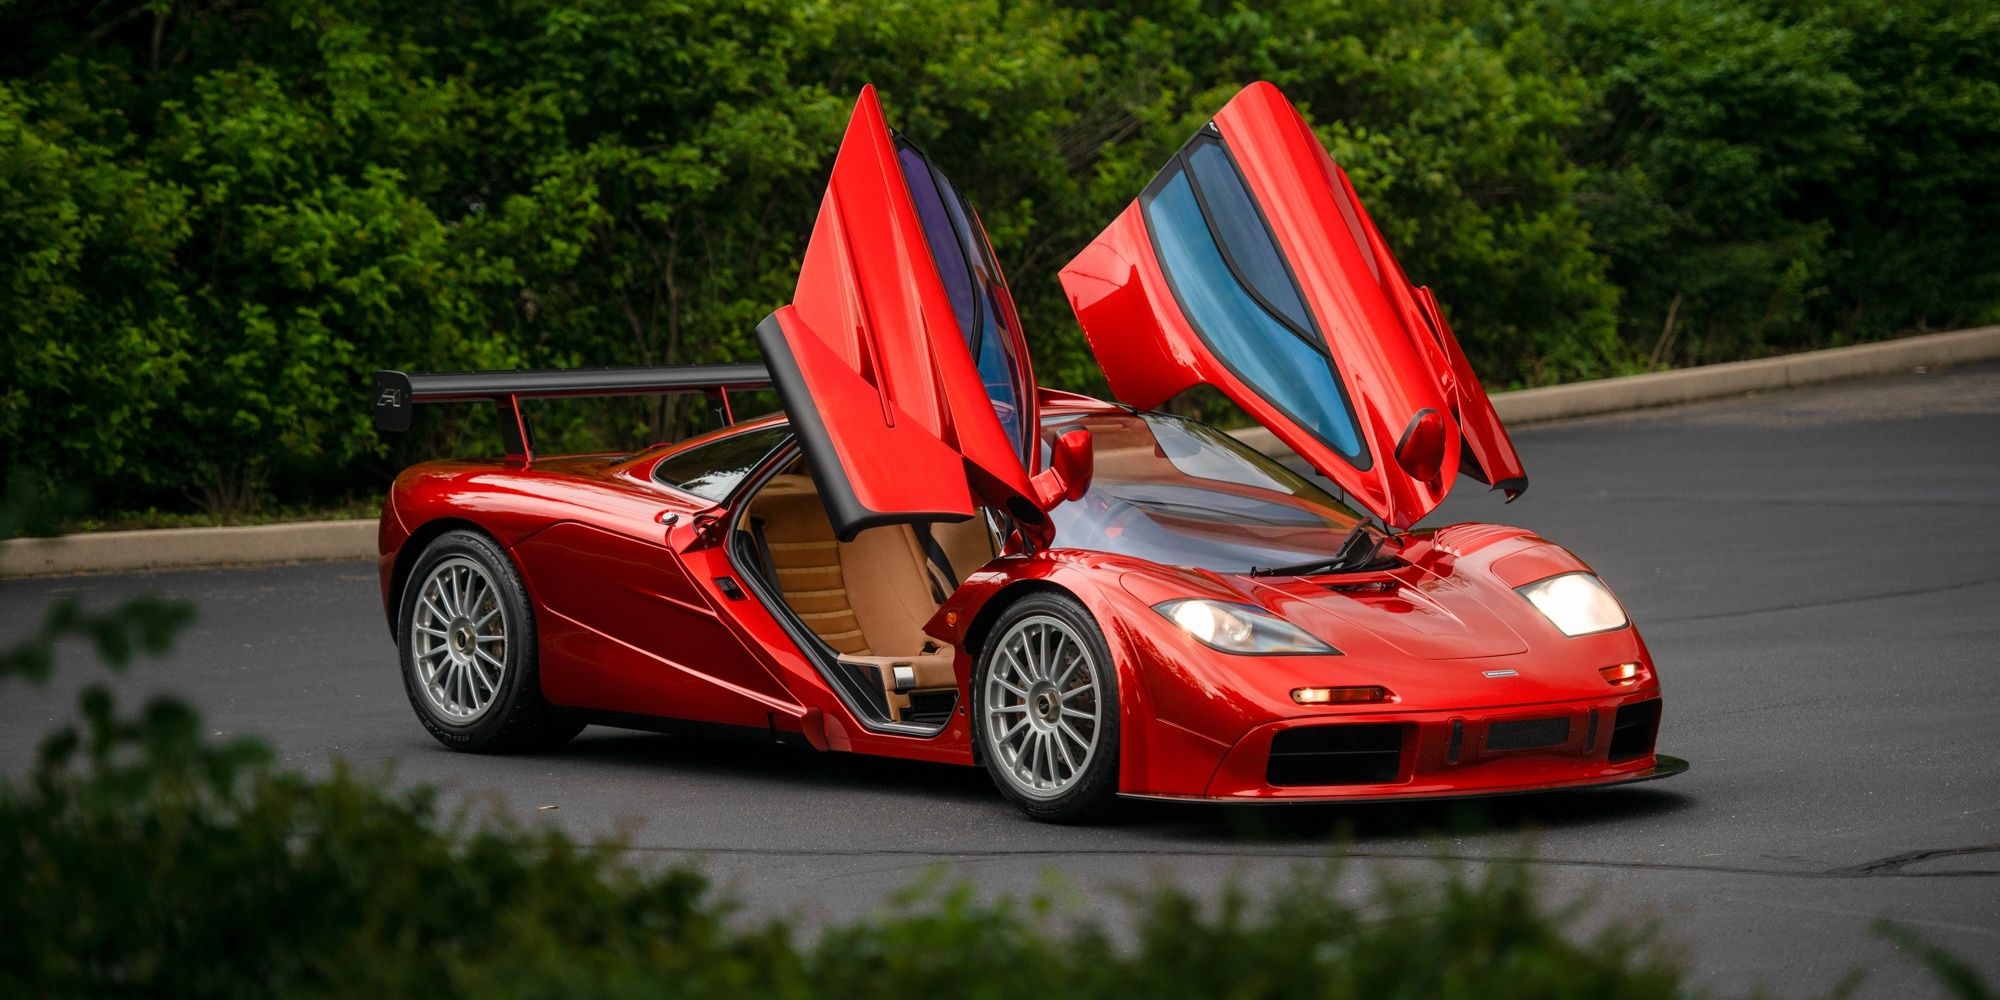 A red 1998 McLaren F1 with its doors pulled up